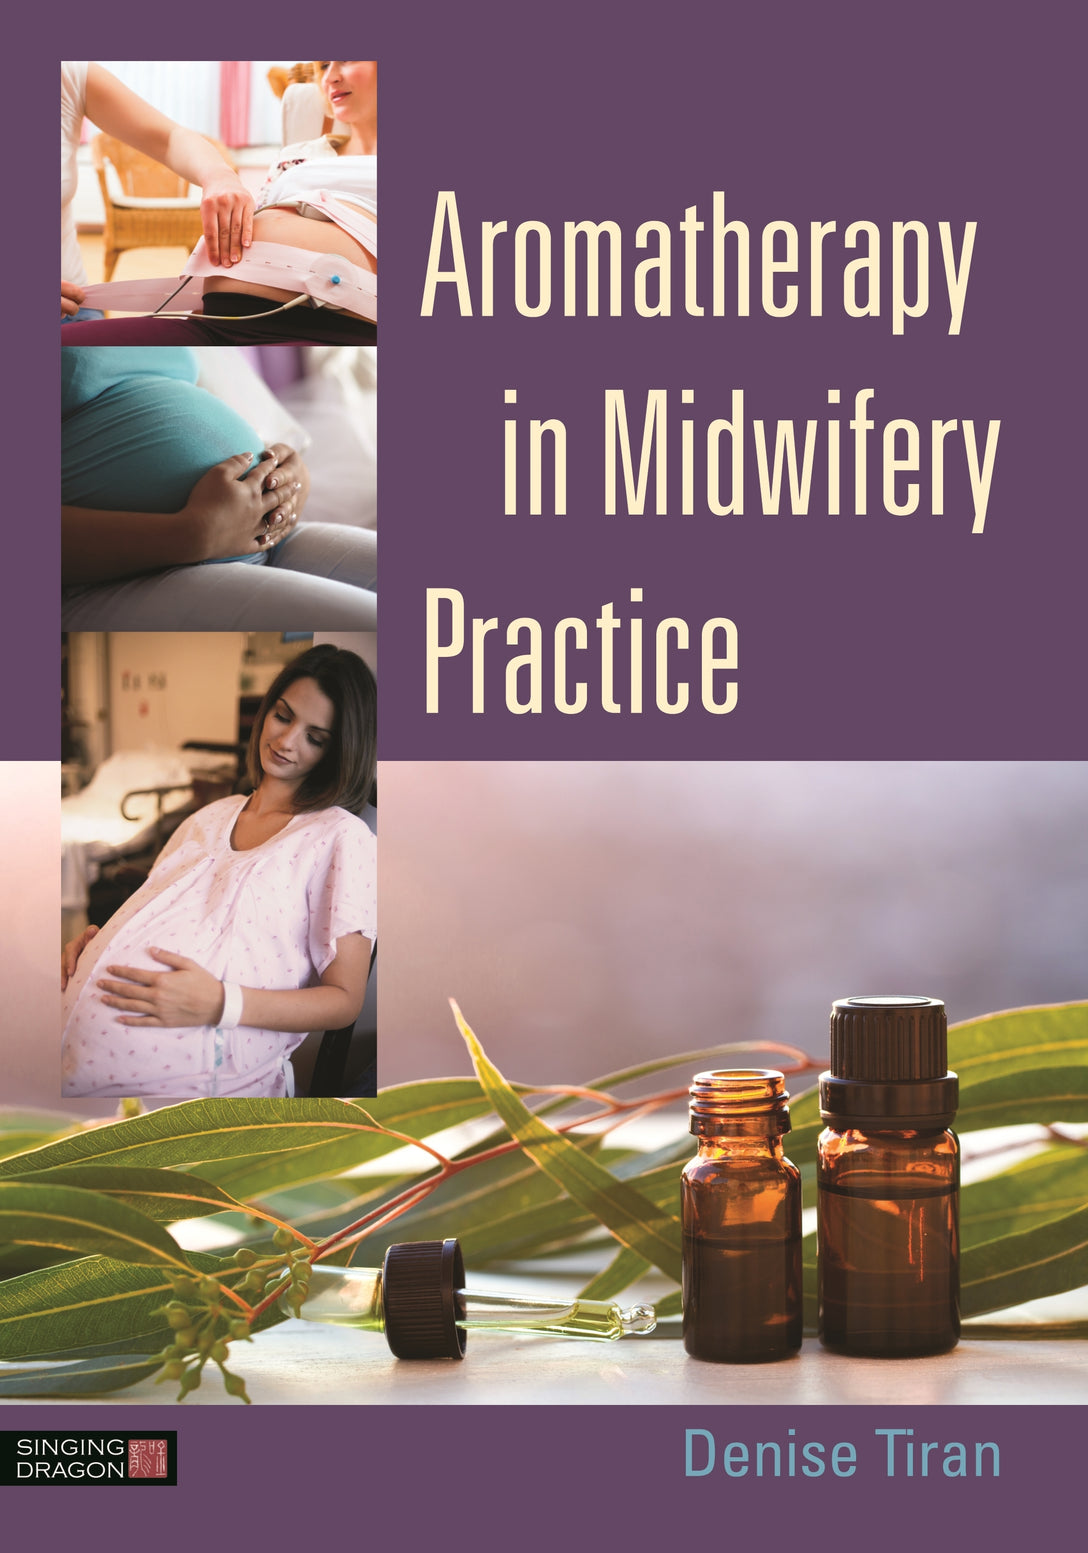 Aromatherapy in Midwifery Practice by Denise Tiran